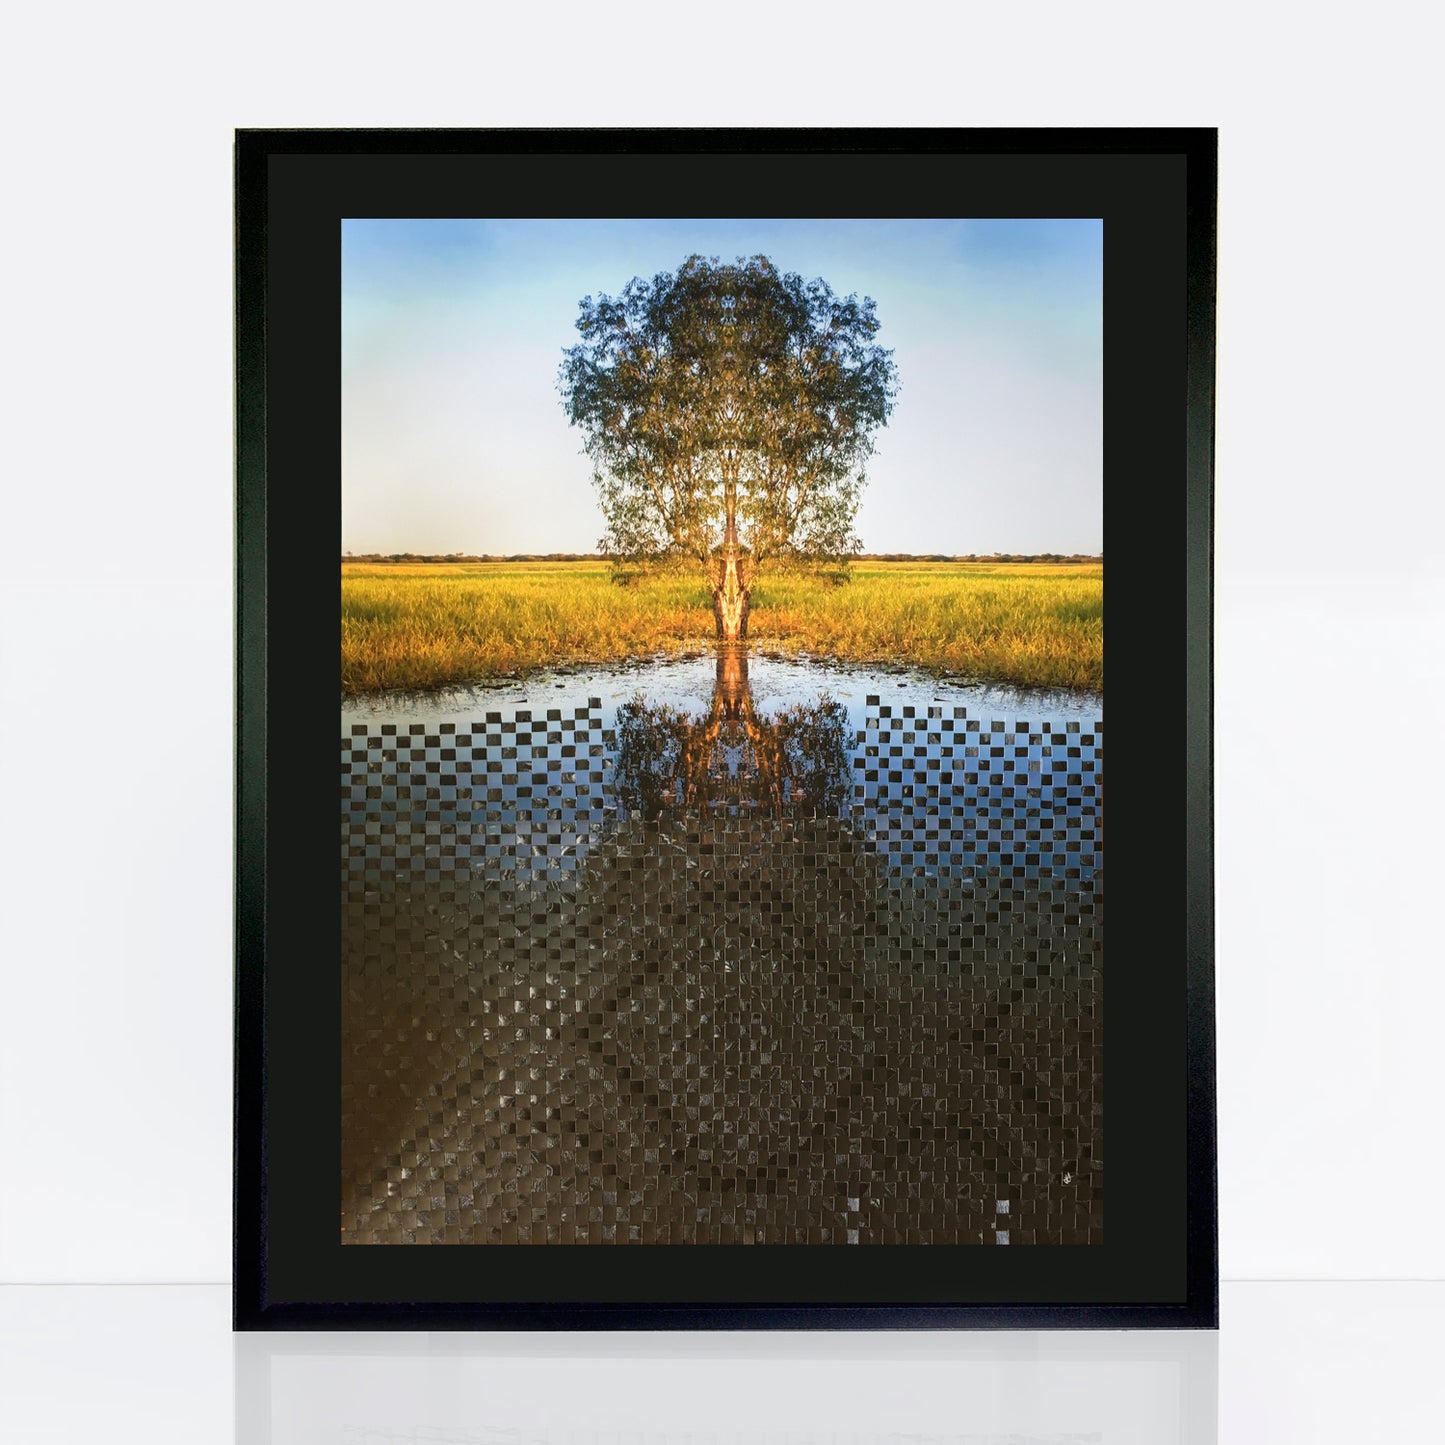 solitary gum tree stands on the bank of a river. The bottom half of the image has been woven with recycled decorative black paper